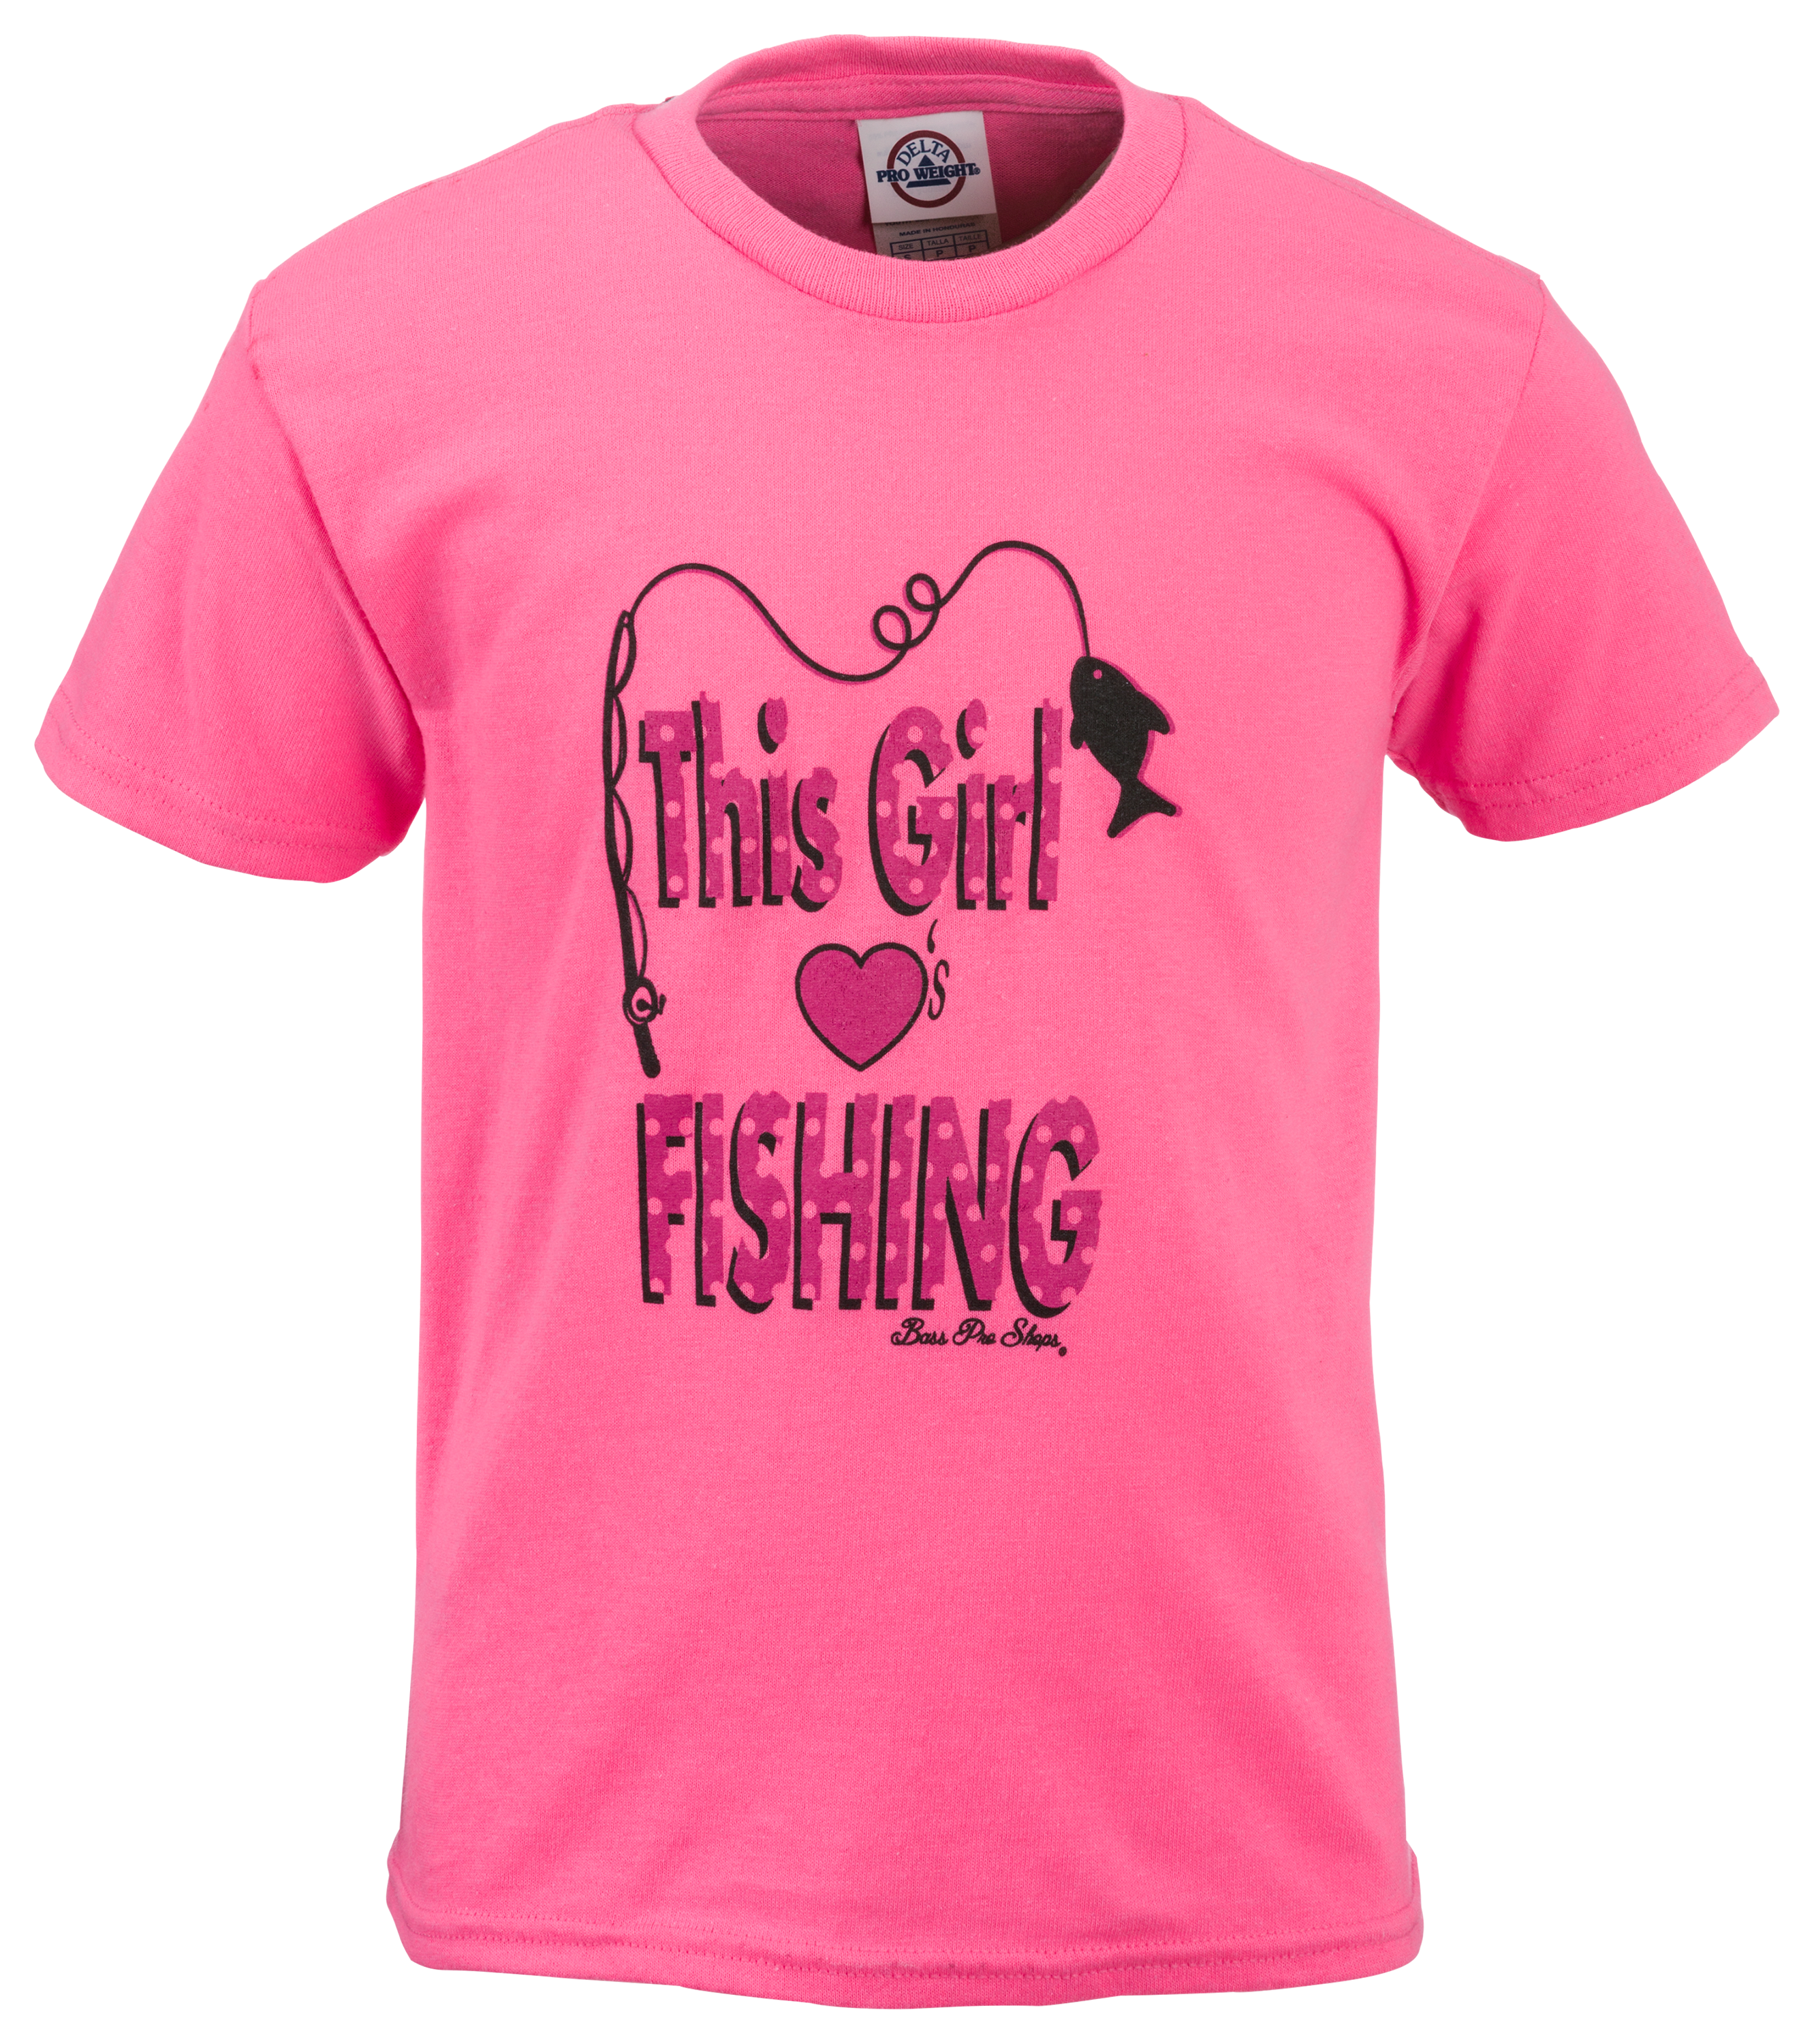 This Gal Loves Fishing | Sticker